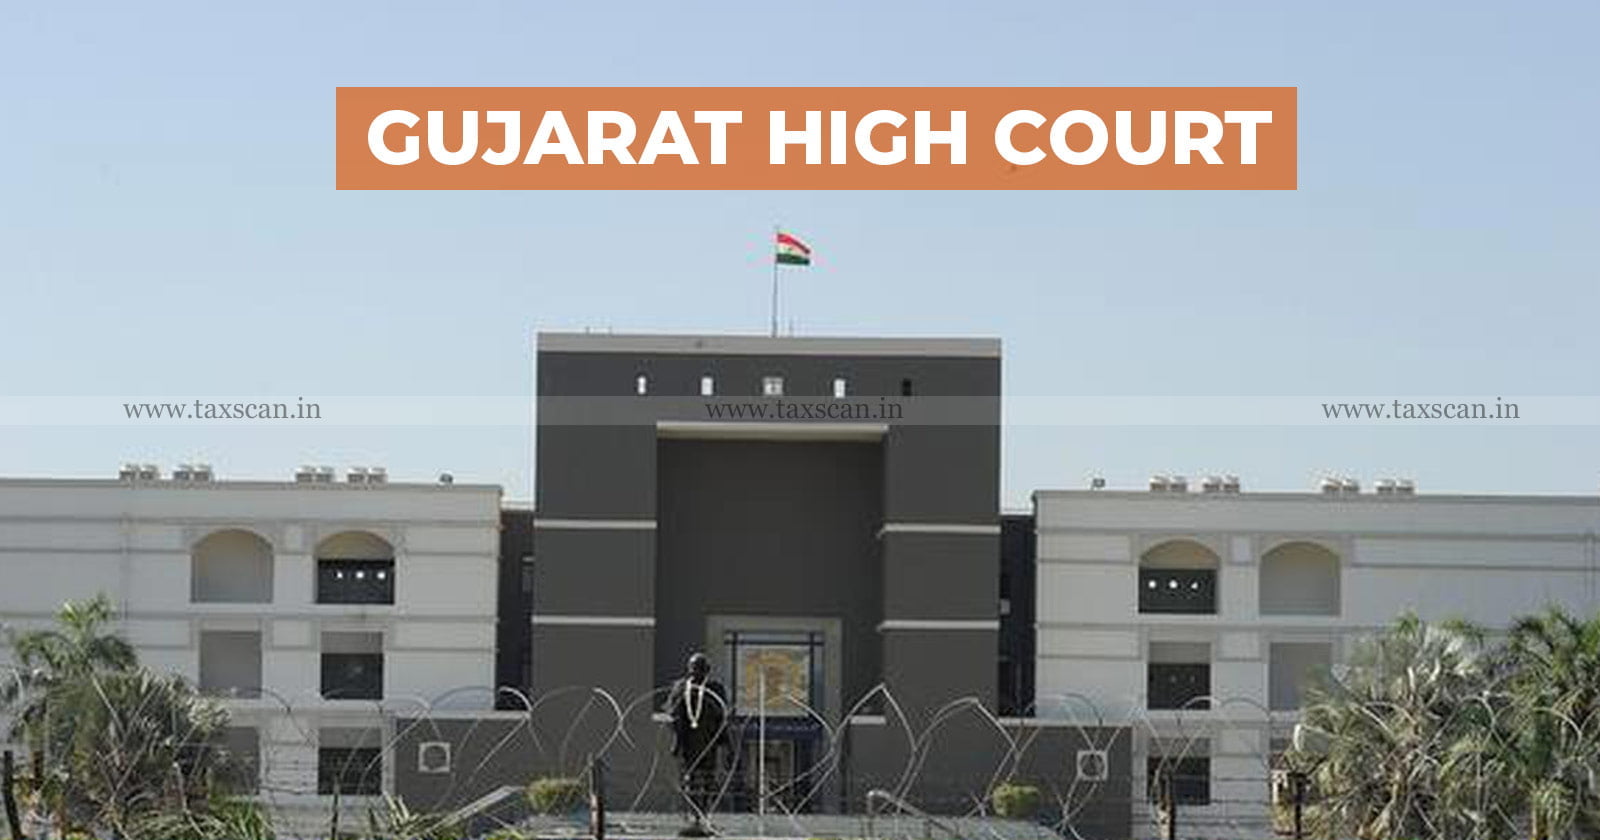 Non Consideration of Reply - Violation of Natural Justice Principles - Gujarat High Court - Hearing to Pass Order - Tax News - High Court News - grant Opportunity - TAXSCAN